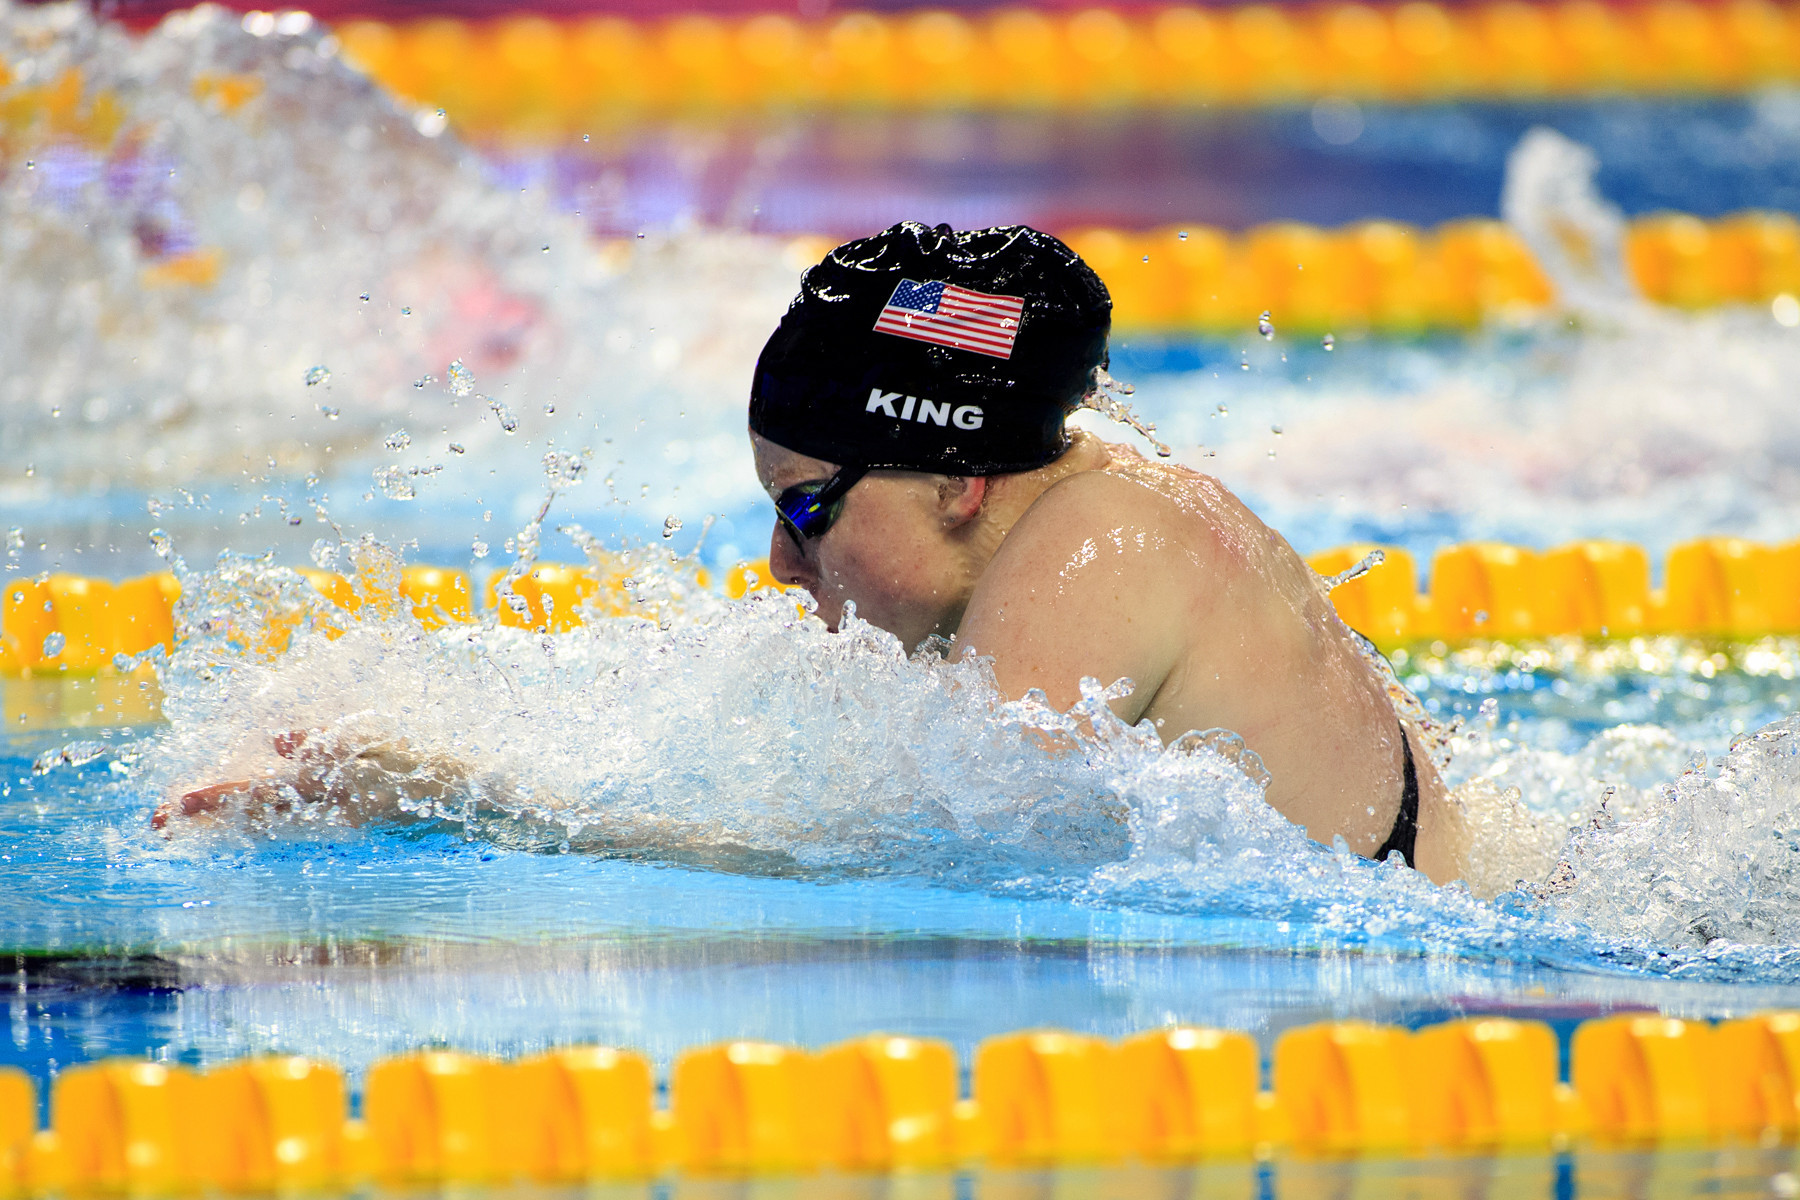 American Lily King won three titles at the International Swimming Federation Champions Swim Series in Indianapolis ©Getty Images